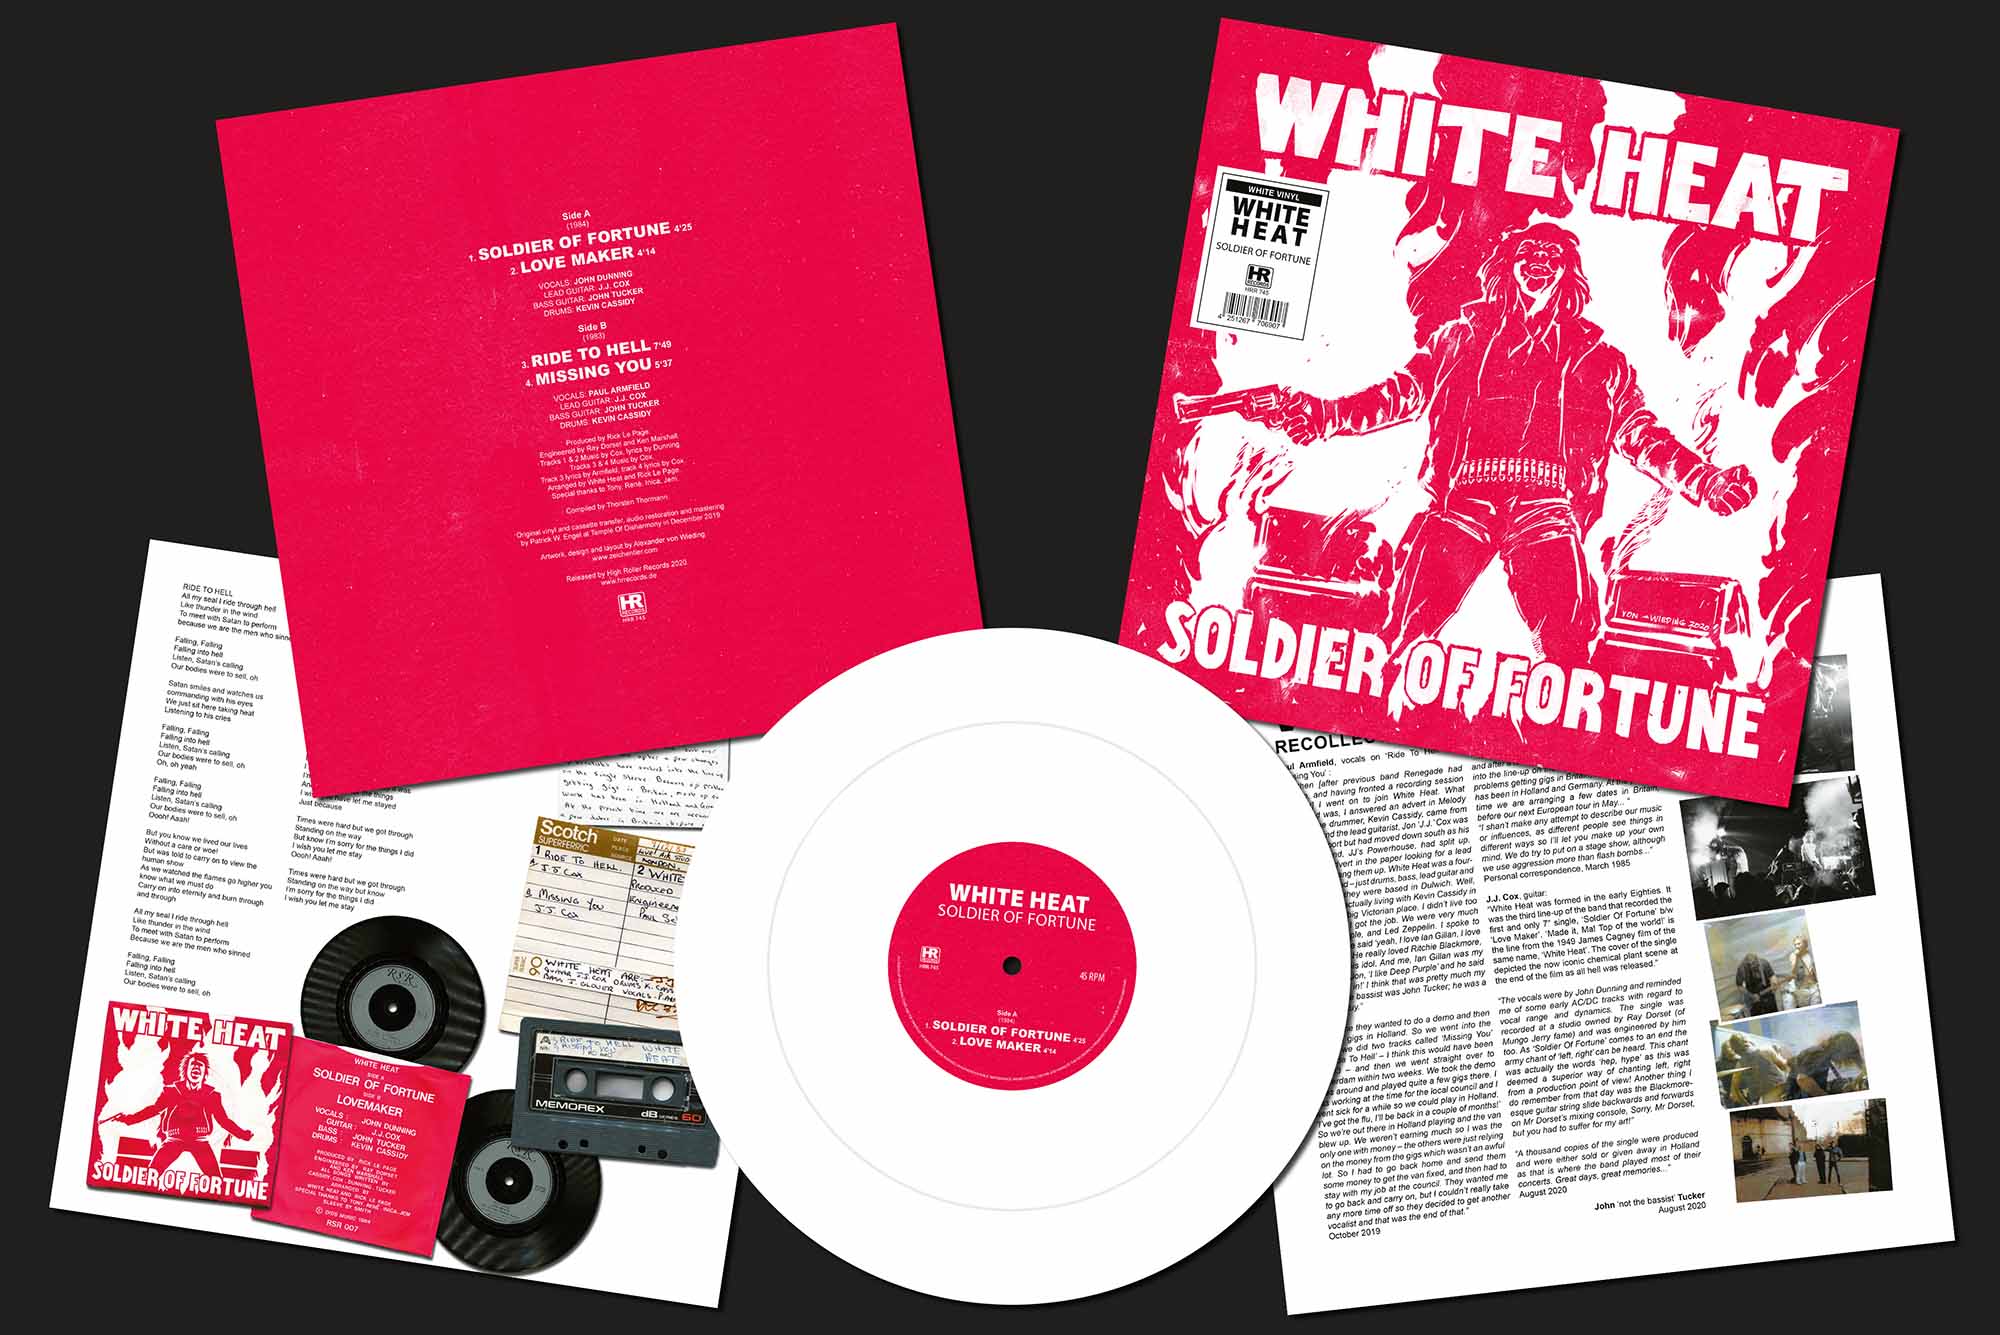 WHITE HEAT - Soldier of Fortune  MLP